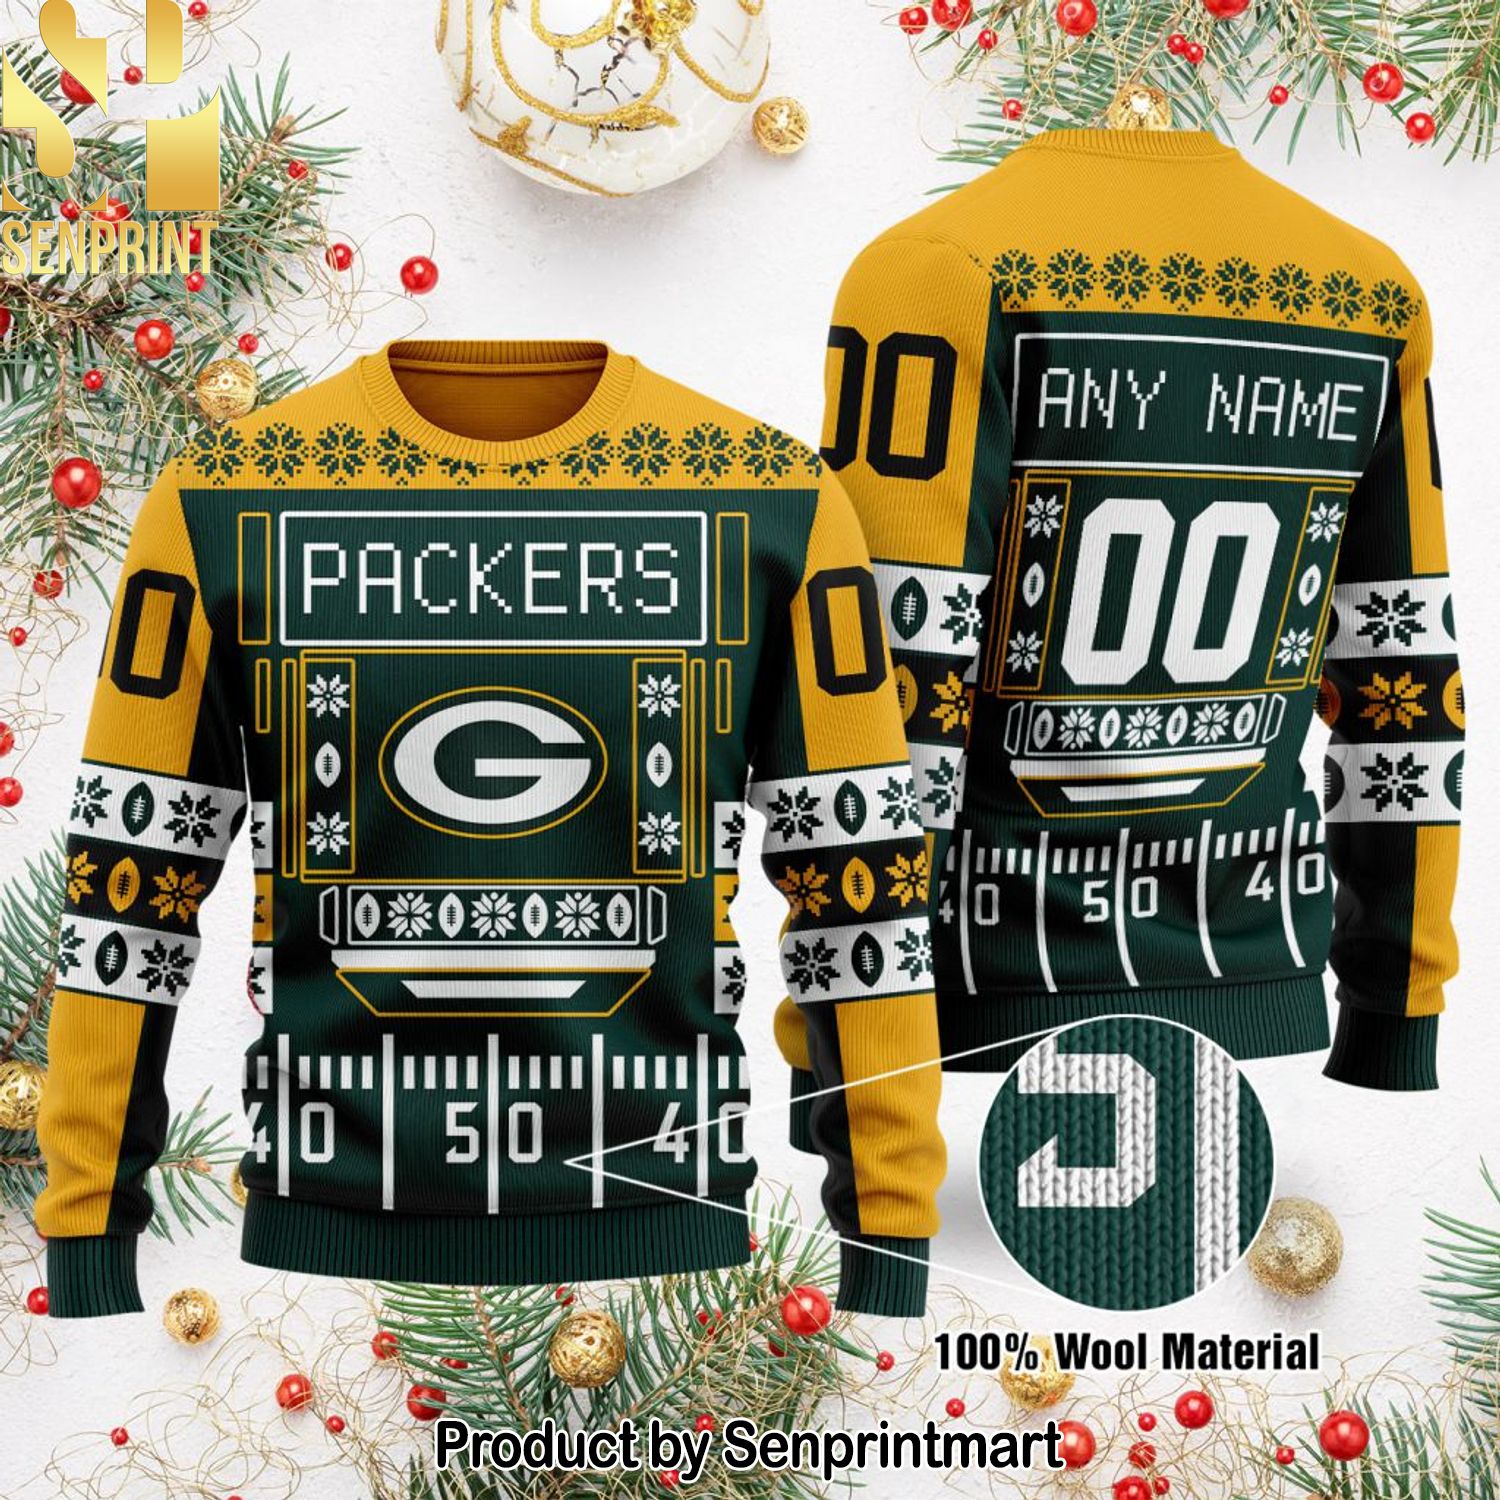 Green Bay Packers NFL Ugly Xmas Wool Knitted Sweater